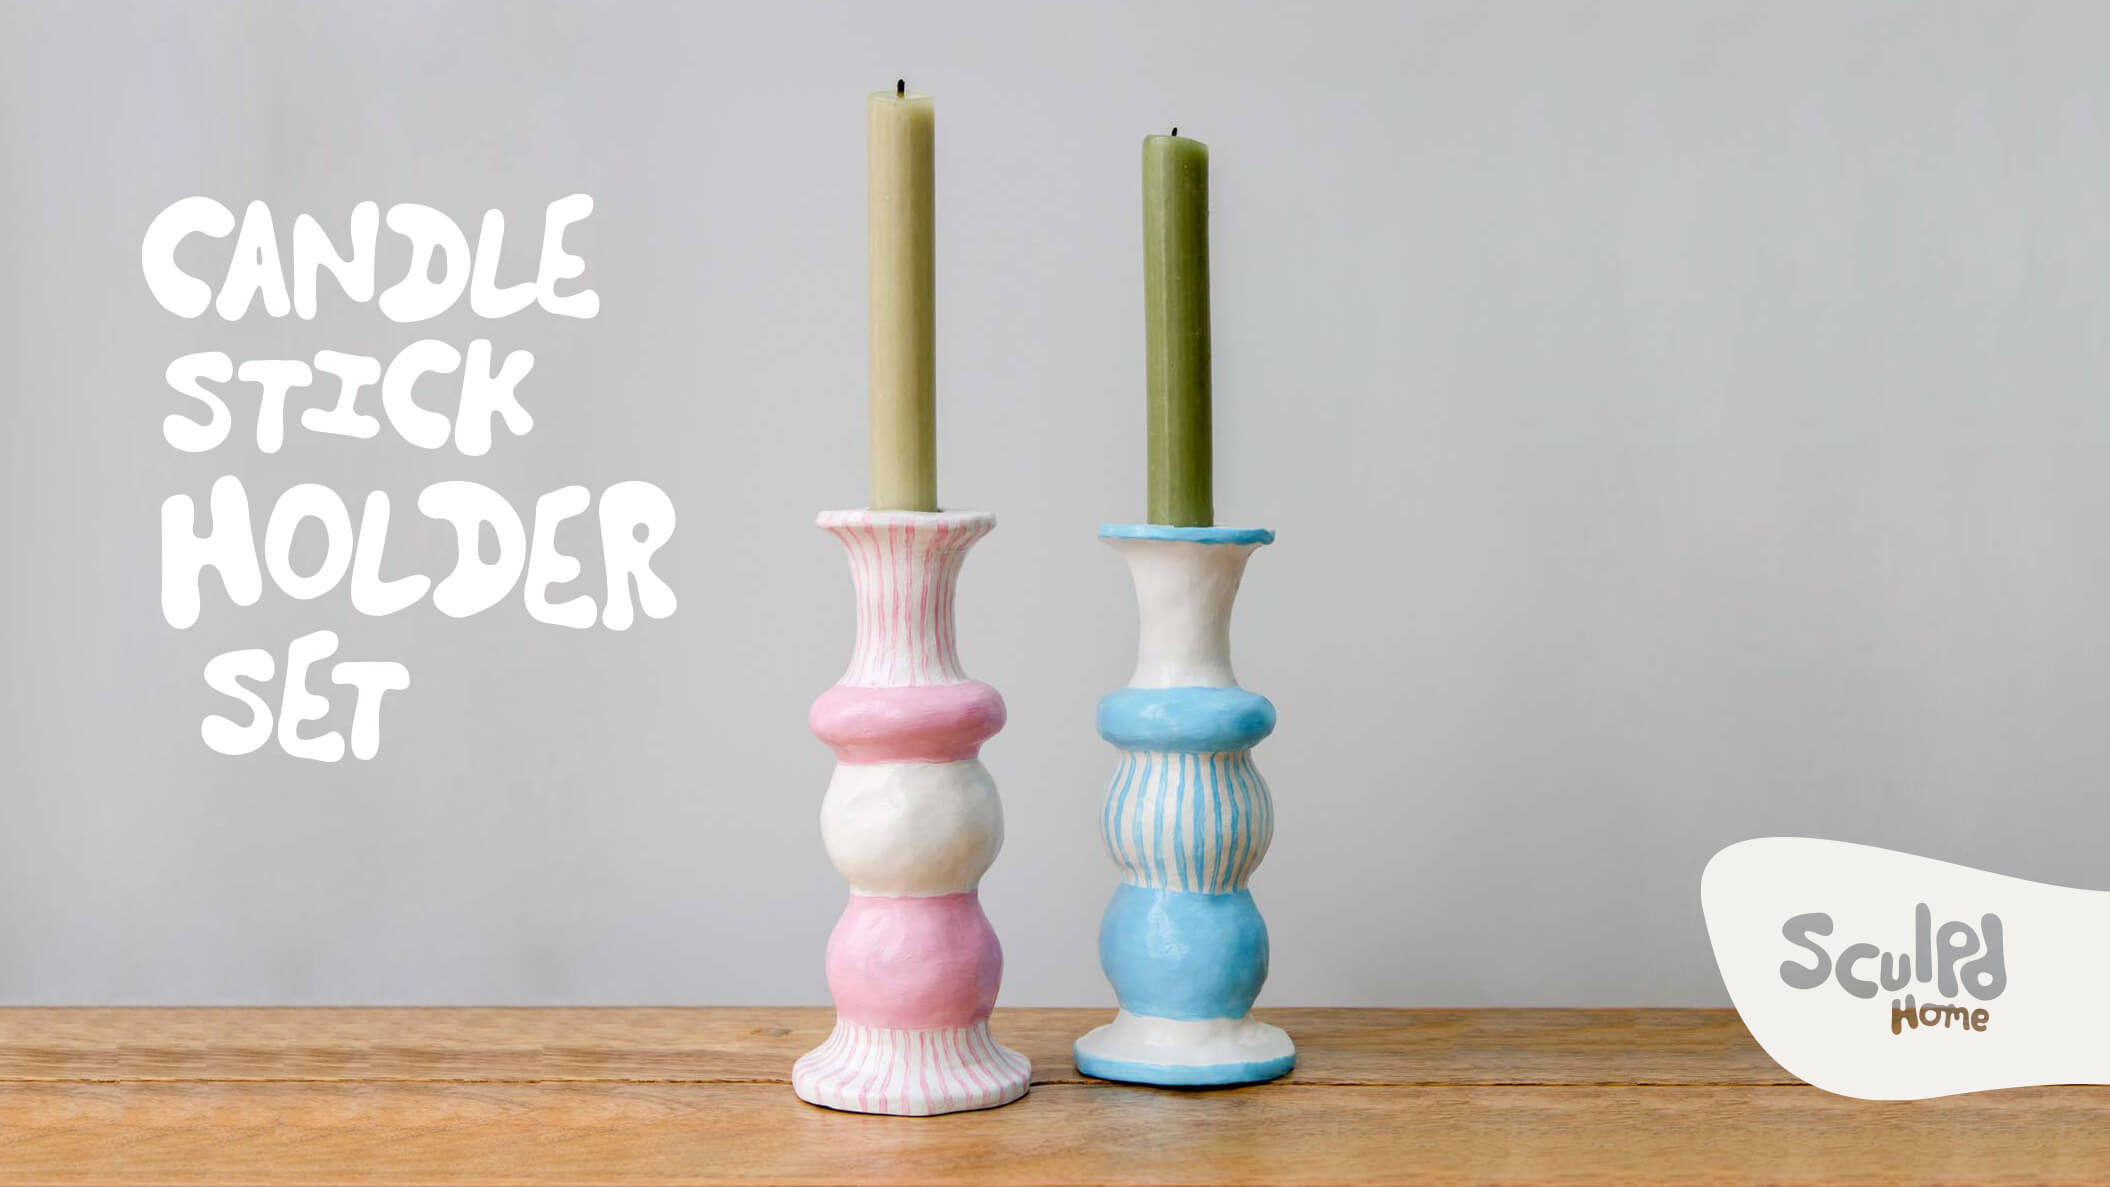 Make Your Own Candlestick Holders | By Sculpd Home